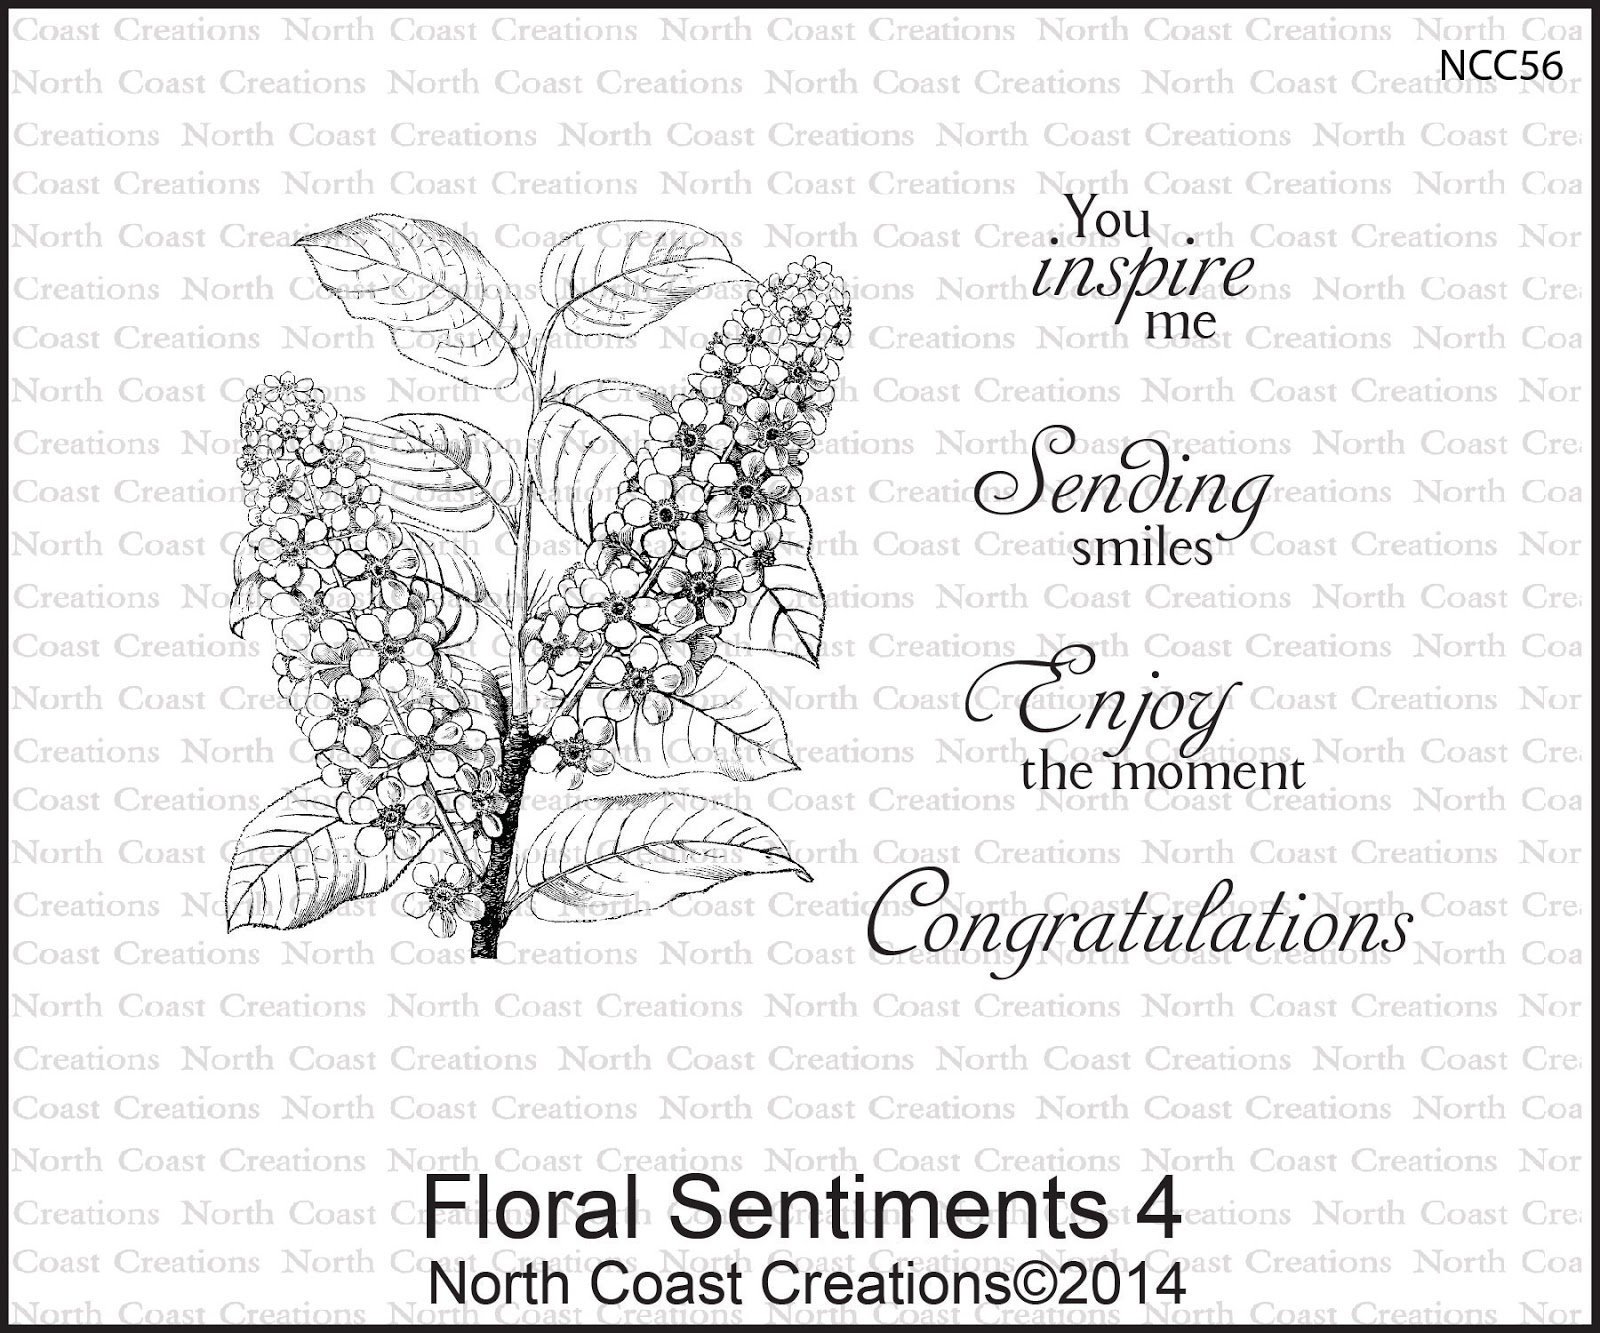 http://www.northcoastcreations.com/index.php/new-releases/ncc56-floral-sentiments-4.html